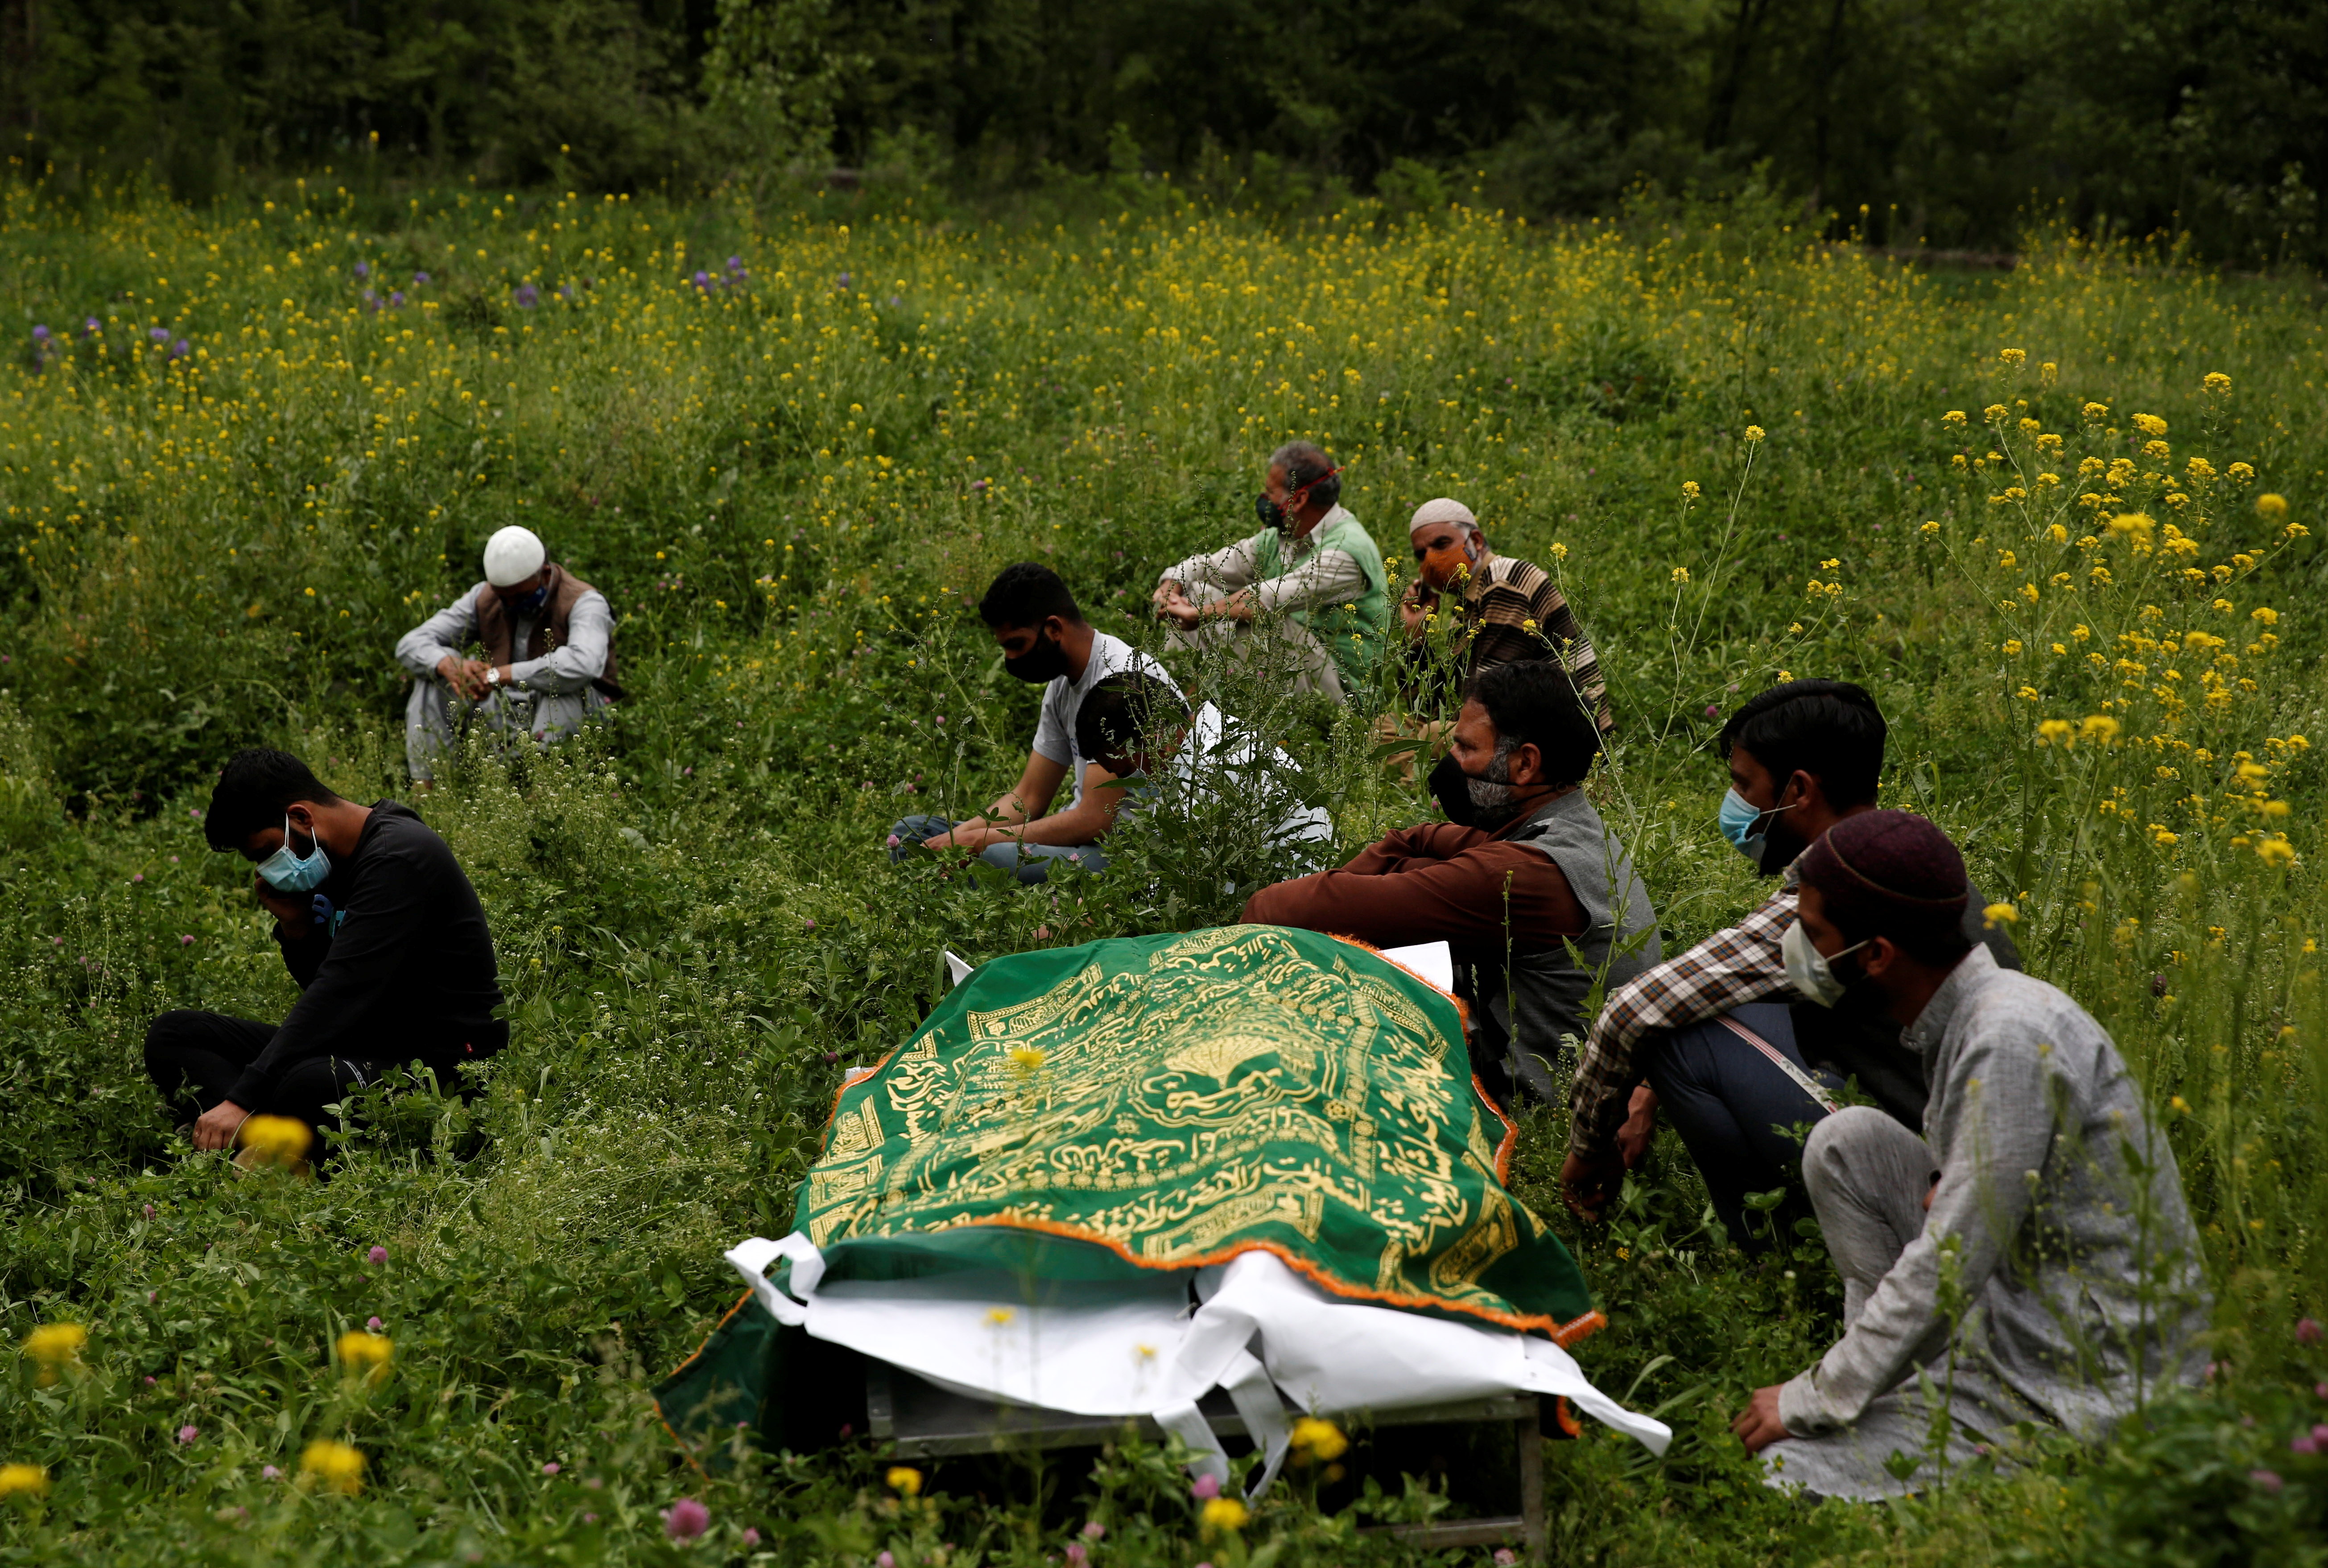 Relatives sit next to the body of a man, who died due to the coronavirus disease (COVID-19), as they wait for a grave to be prepared for his burial at a graveyard on the outskirts of Srinagar